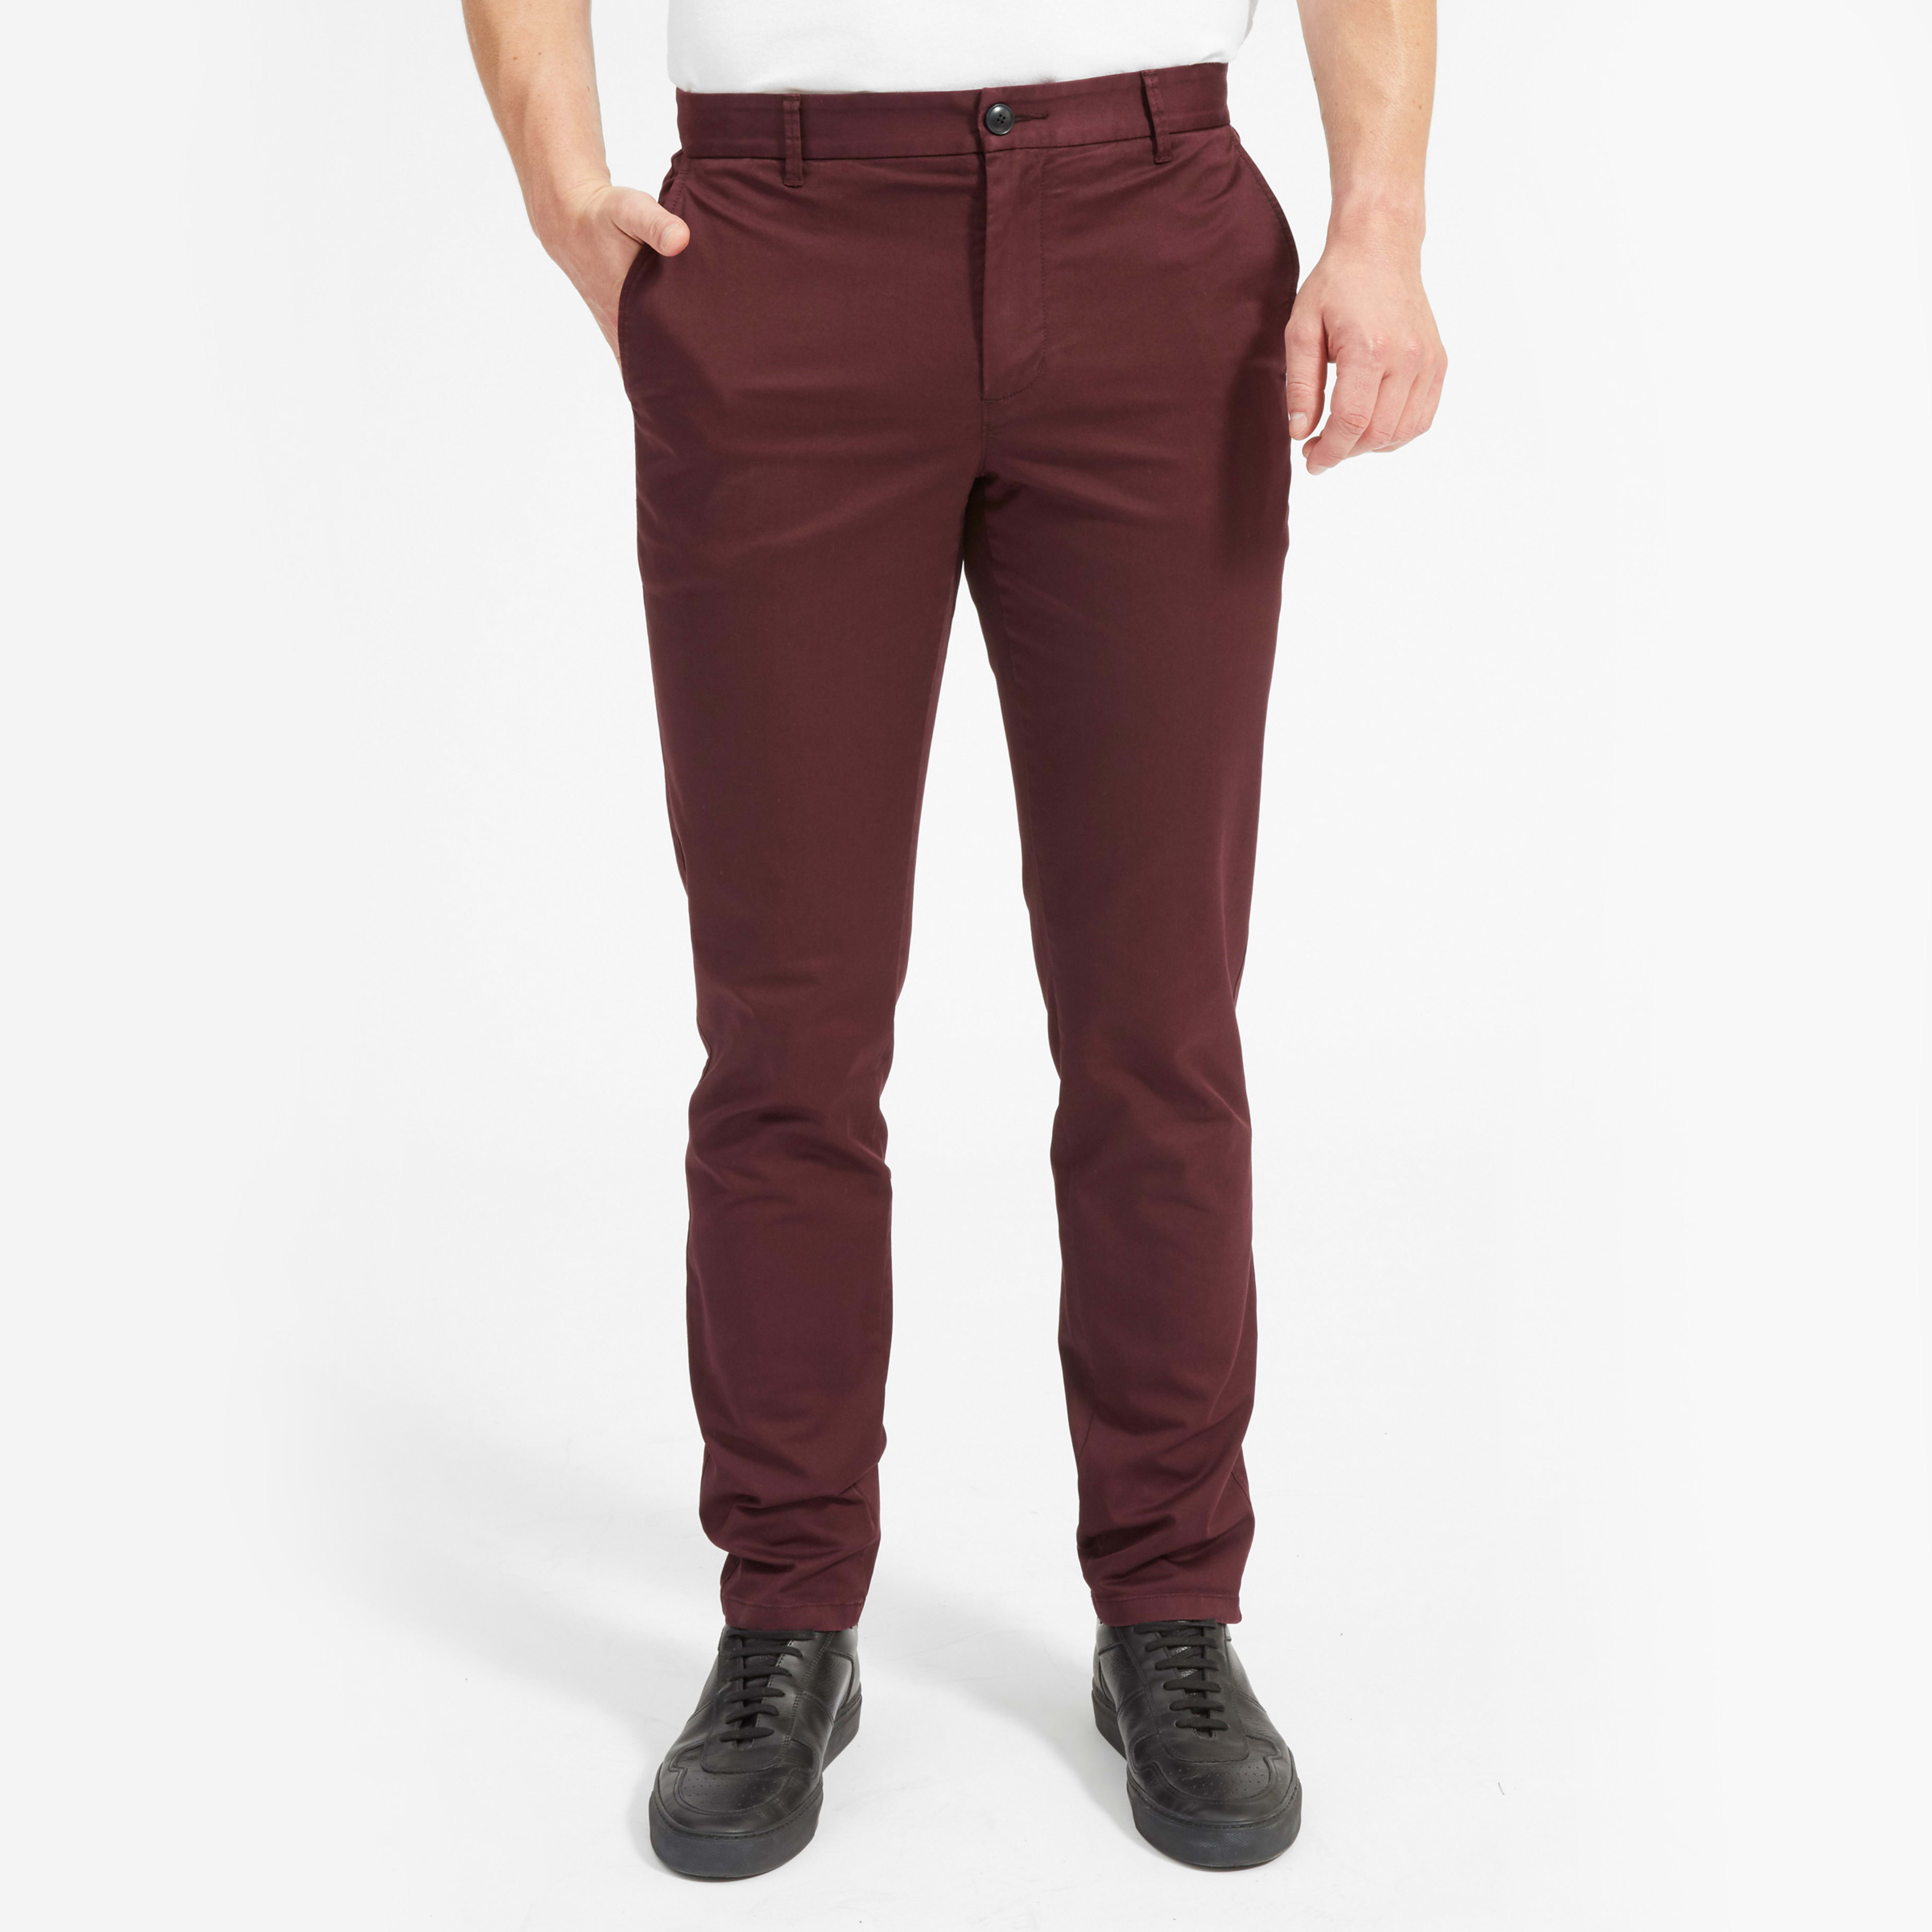 M Midweight Athletic Chino, Slate Grey